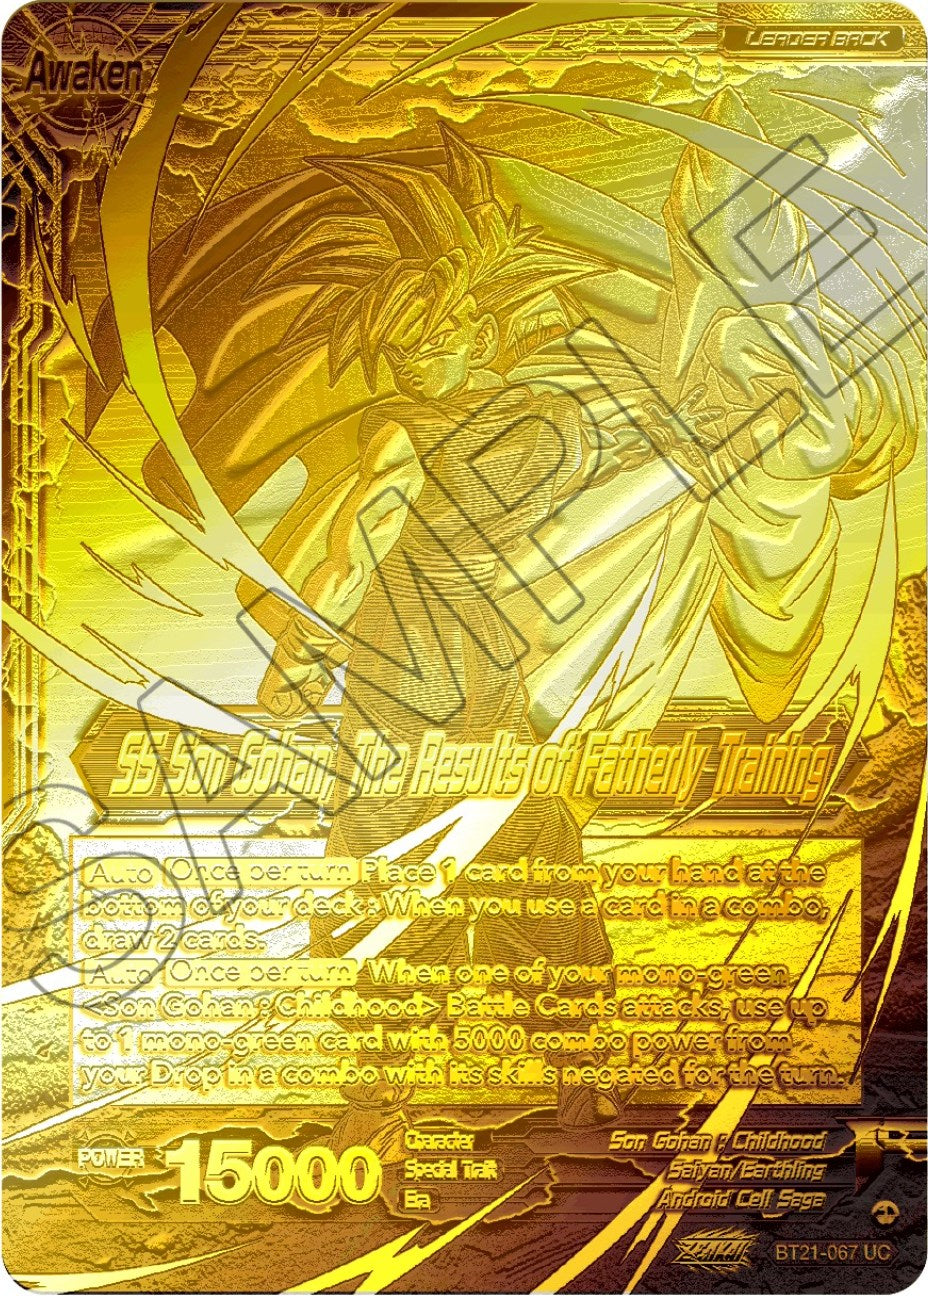 Son Gohan // SS Son Gohan, The Results of Fatherly Training (2023 Championship Finals) (Gold Metal Foil) (BT21-067) [Tournament Promotion Cards] | Arkham Games and Comics